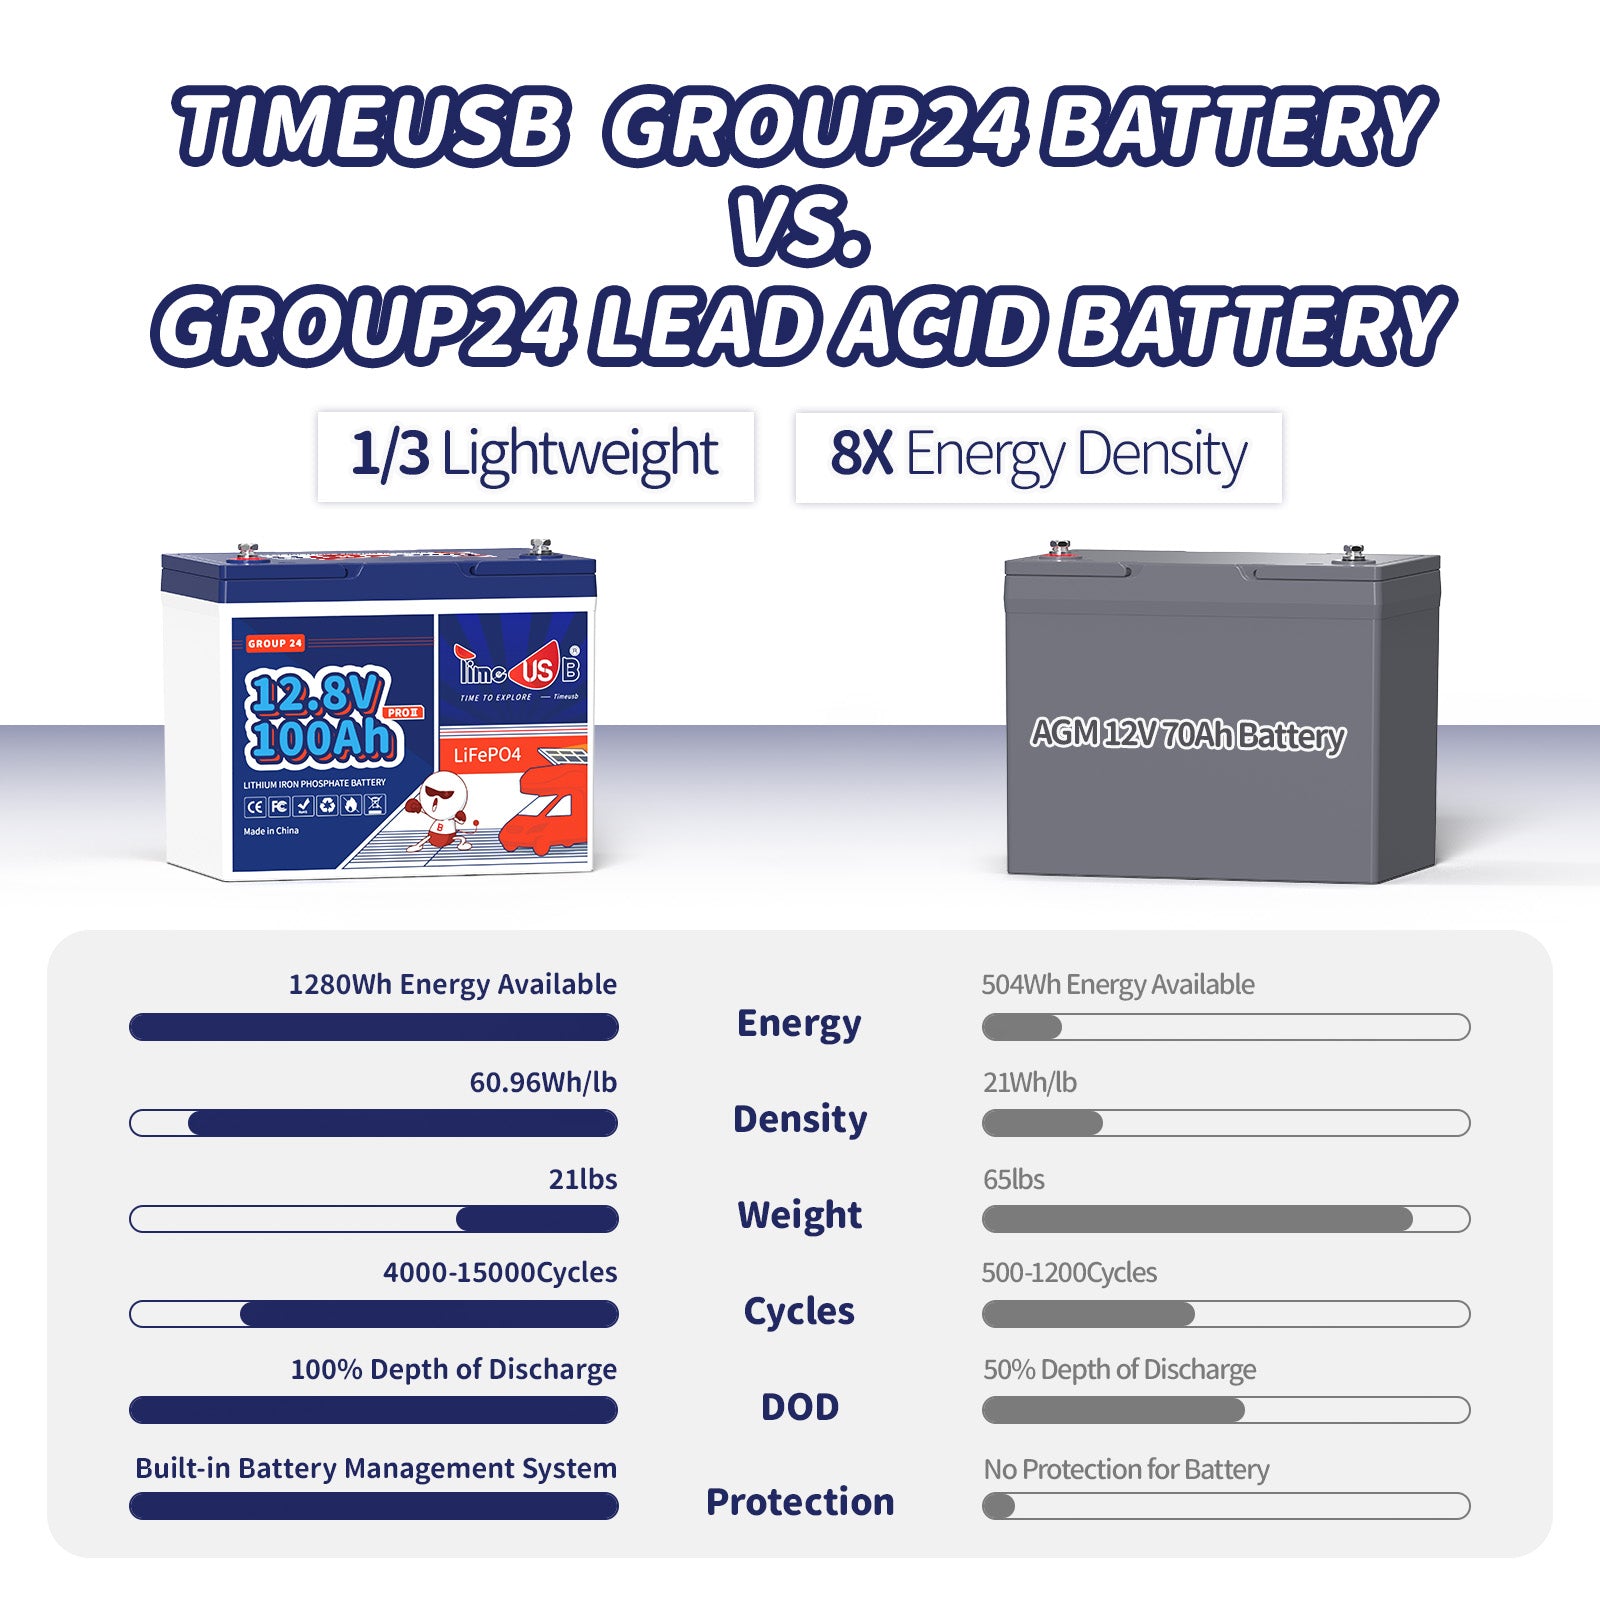 Timeusb Group24 Battery vs Group24 Lead Acid Battery